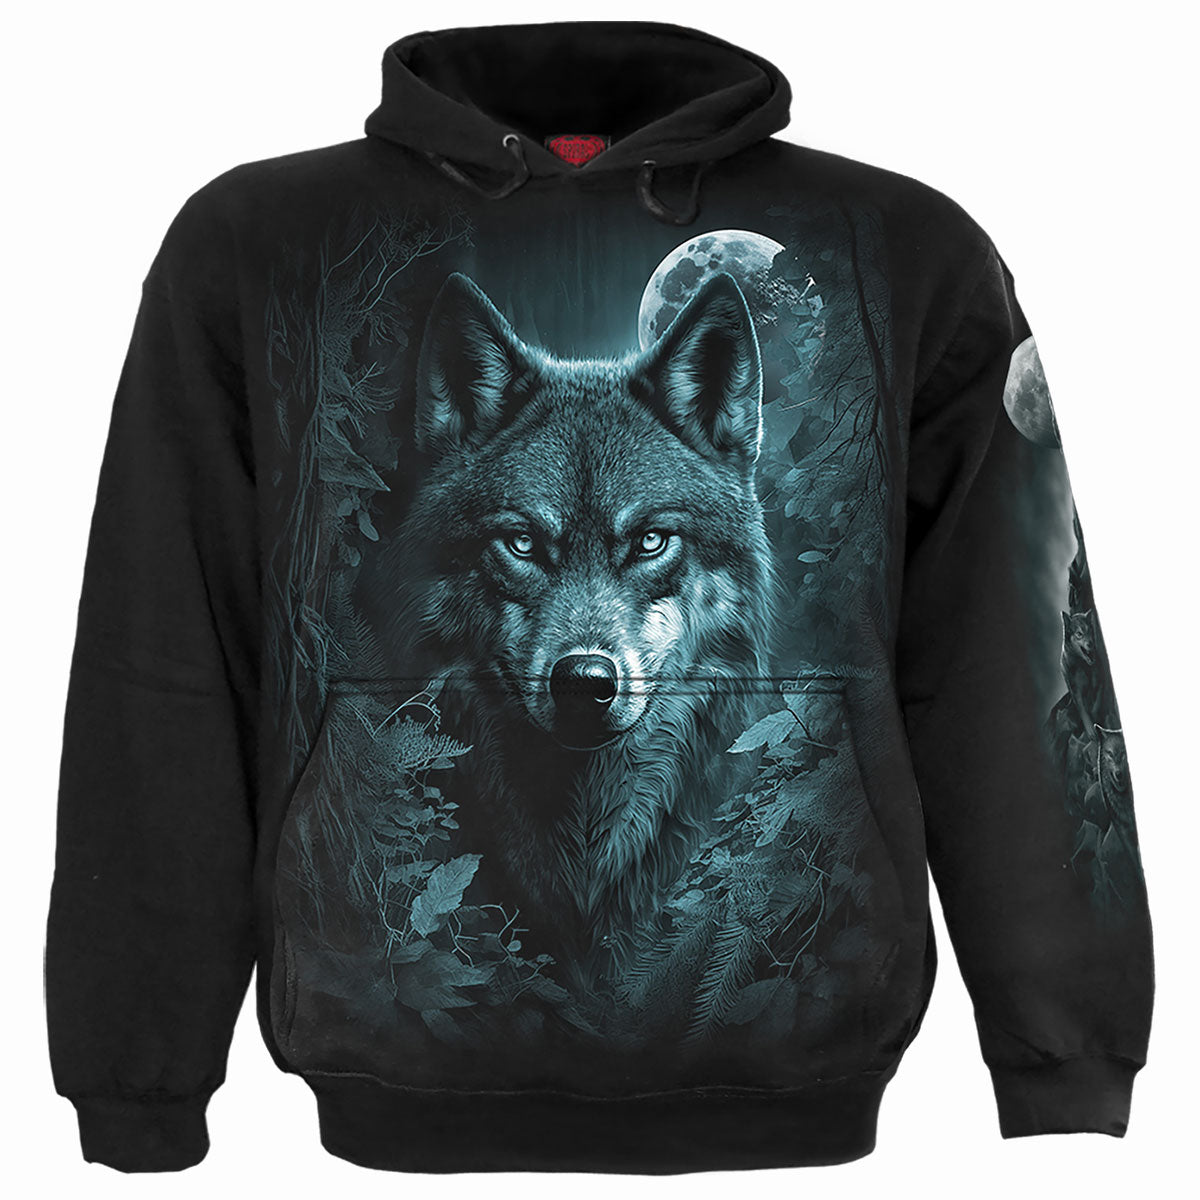 FOREST GUARDIANS - Hoody Black – Spiral Direct